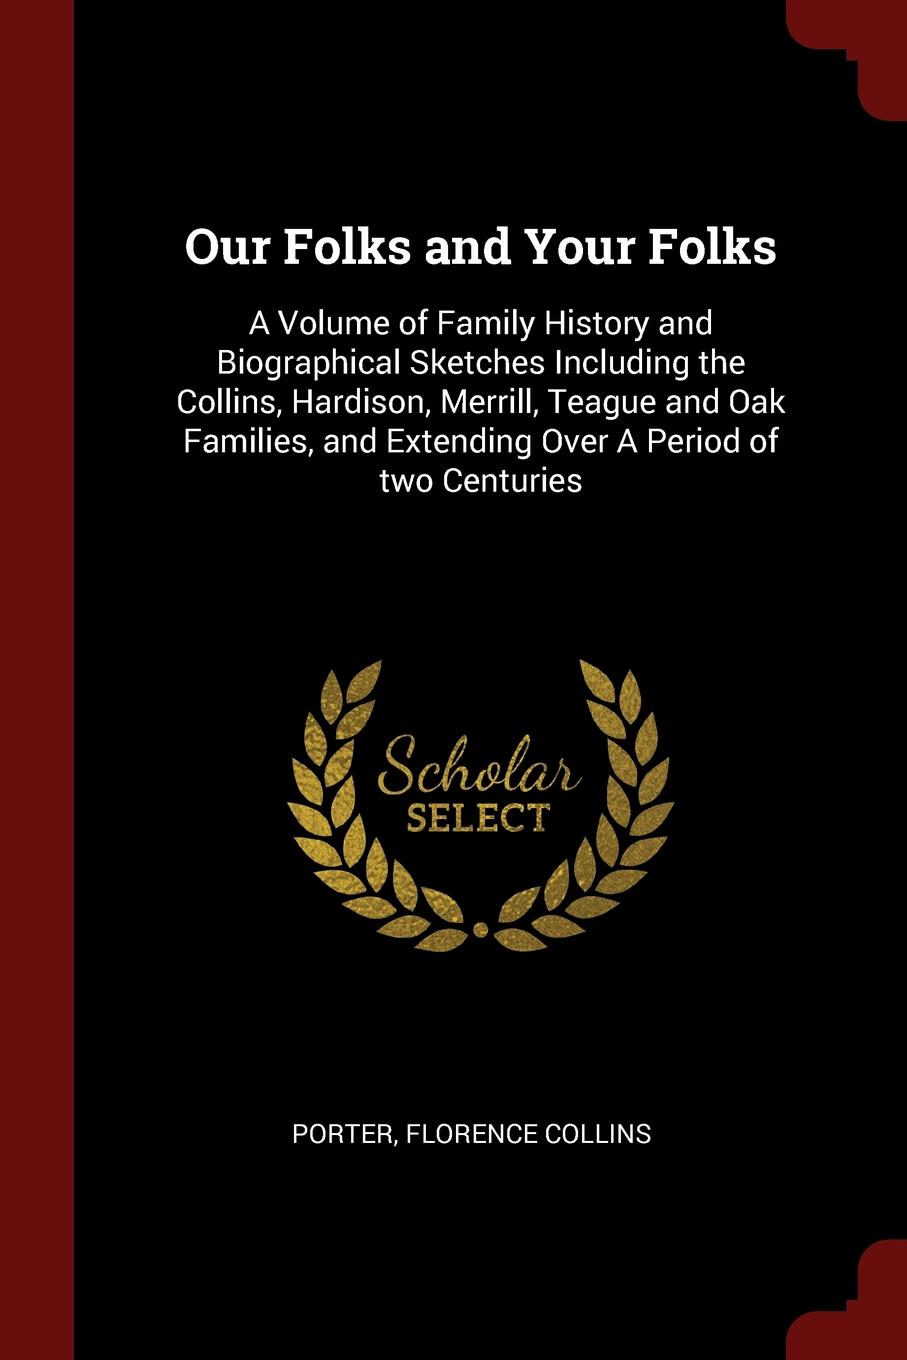 Our Folks and Your Folks. A Volume of Family History and Biographical Sketches Including the Collins, Hardison, Merrill, Teague and Oak Families, and Extending Over A Period of two Centuries